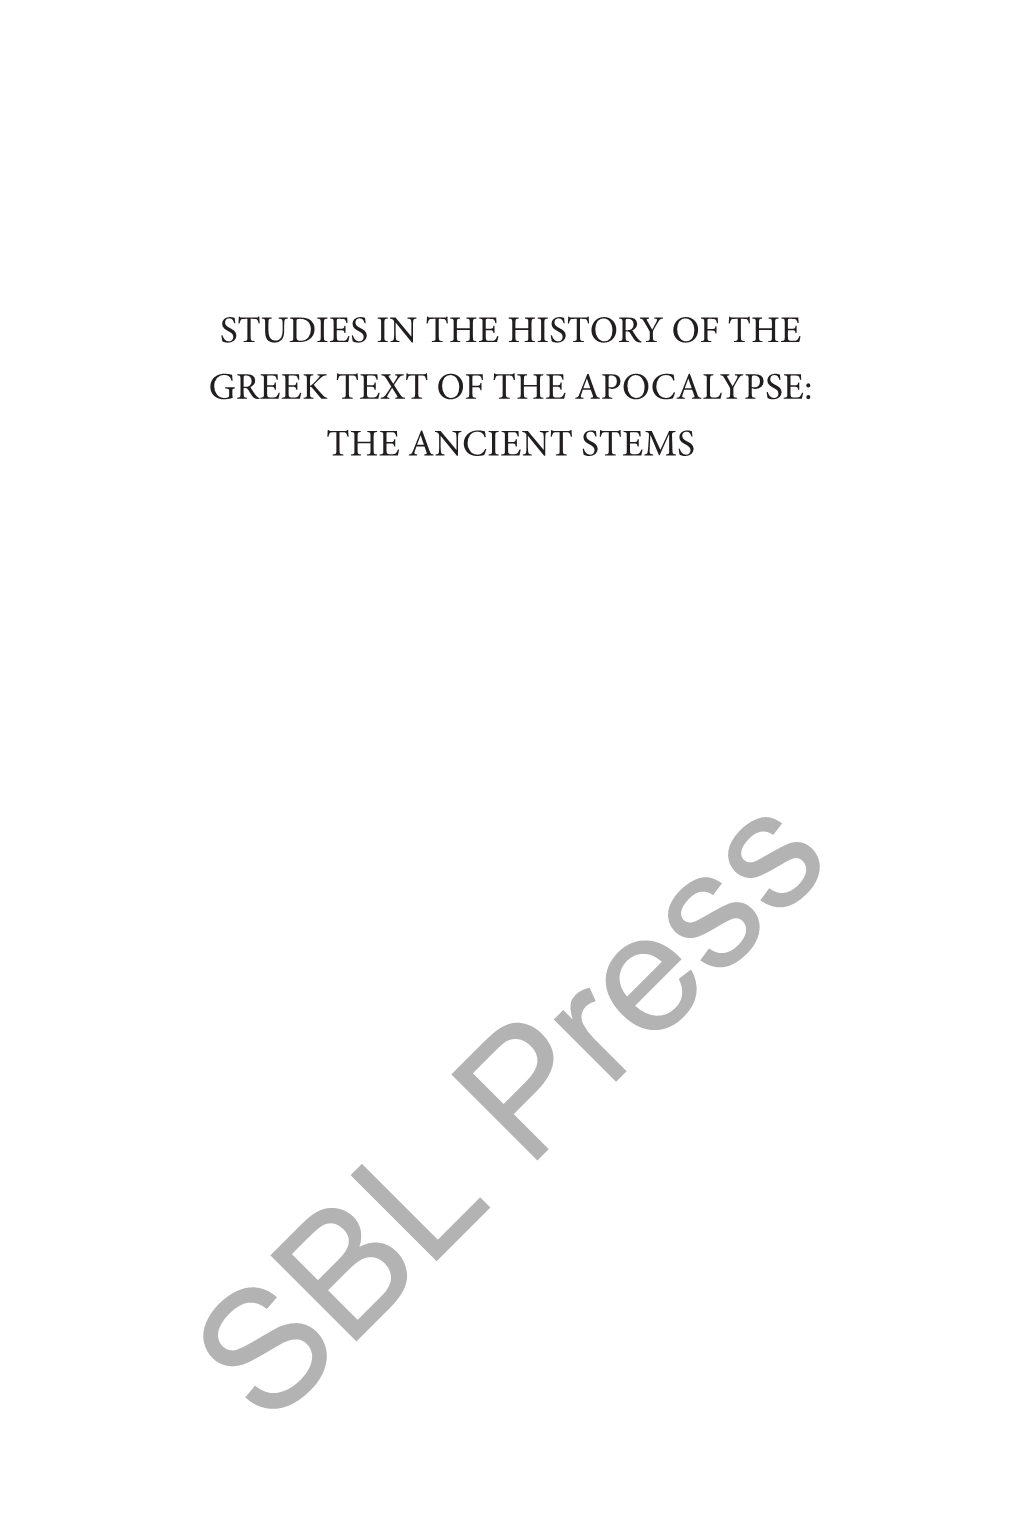 Studies in the History of the Greek Text of the Apocalypse: the Ancient